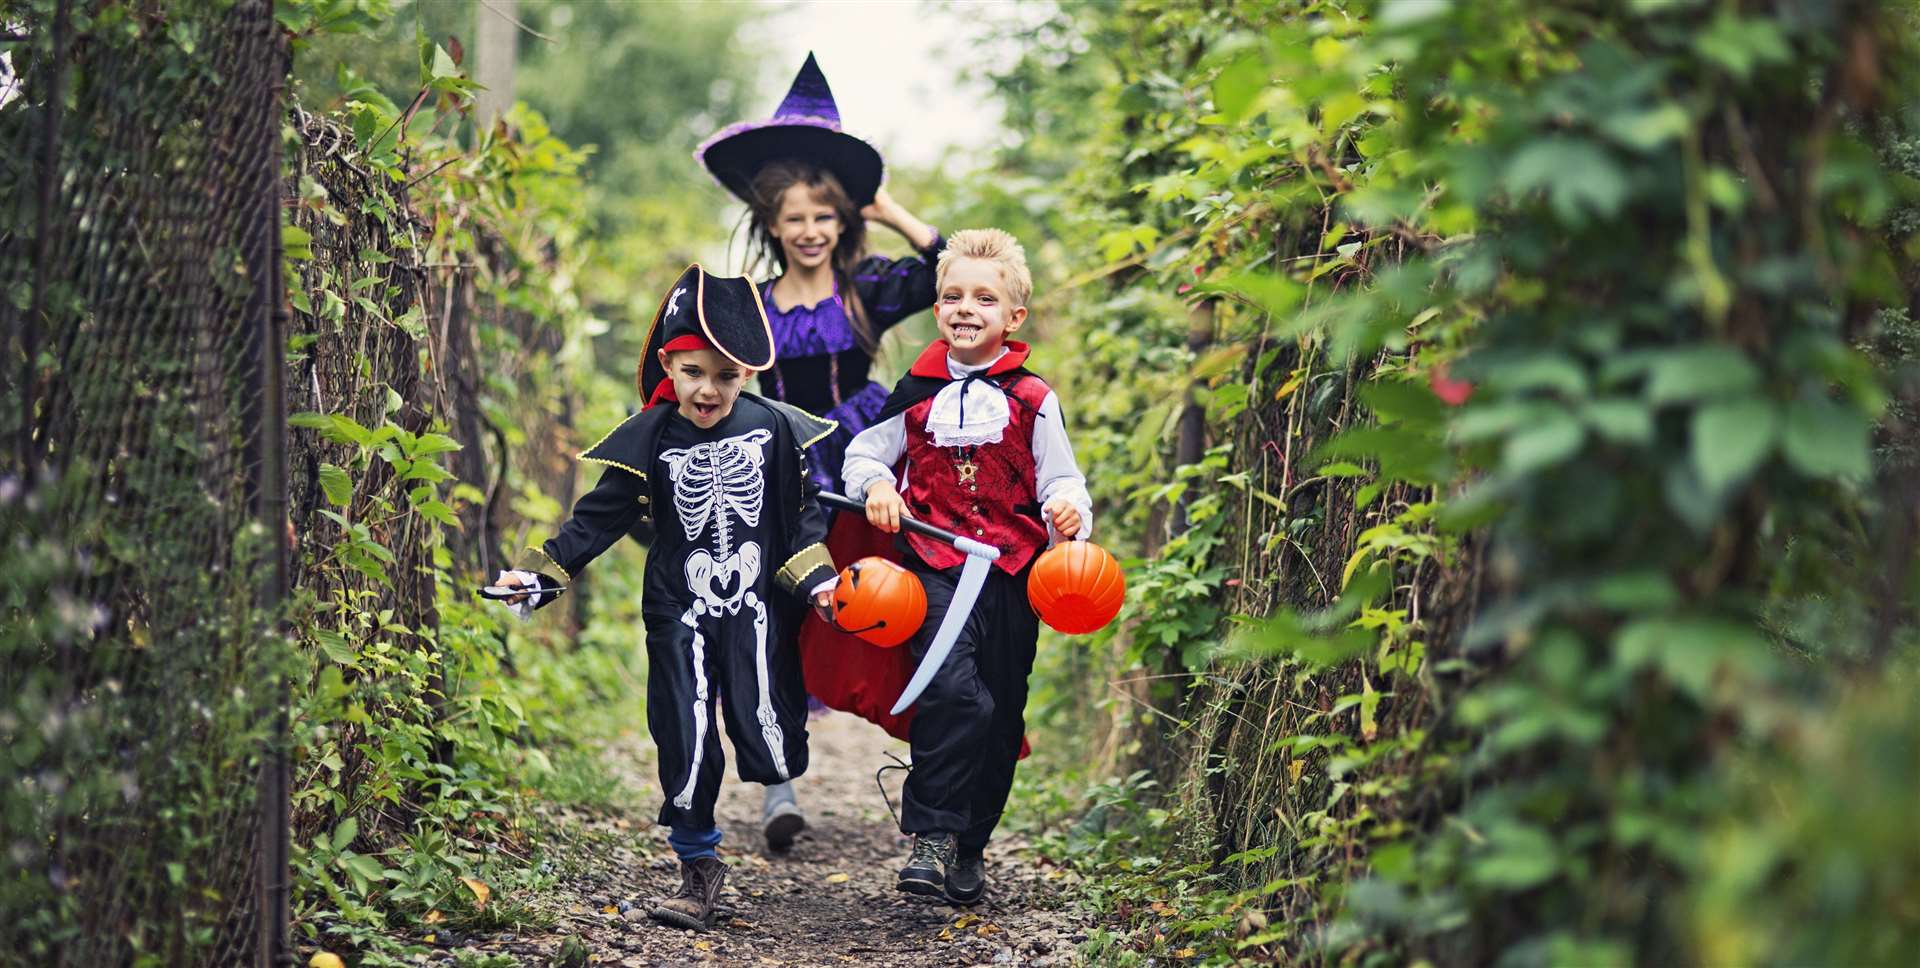 From a fang-tastic Halloween trail to ghoulishly good entertainment, there’s plenty of family fun to be had at Loveashford’s Day of the Dead Halloween event.